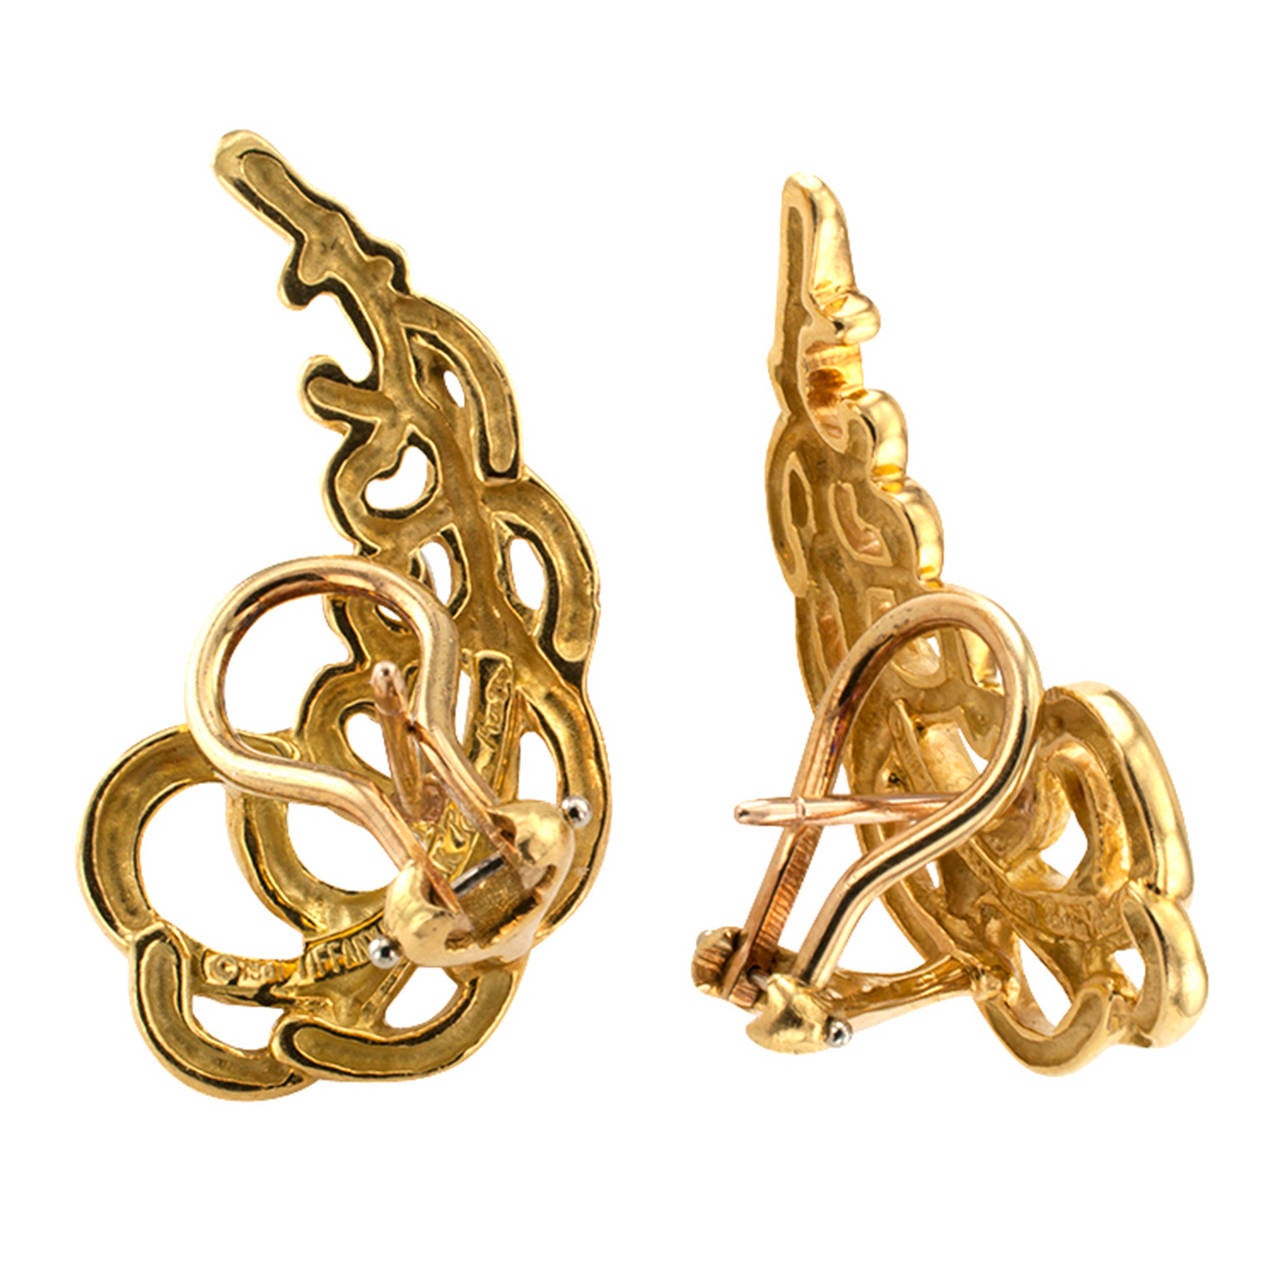 Tiffany & Co. Paloma Picasso Earrings

Branching and scrolling bands of gold converge to form an eye-catching and esoteric design that when worn goes up the ear, gently following along the contours of the ear lobe and resting just so, perfectly. 